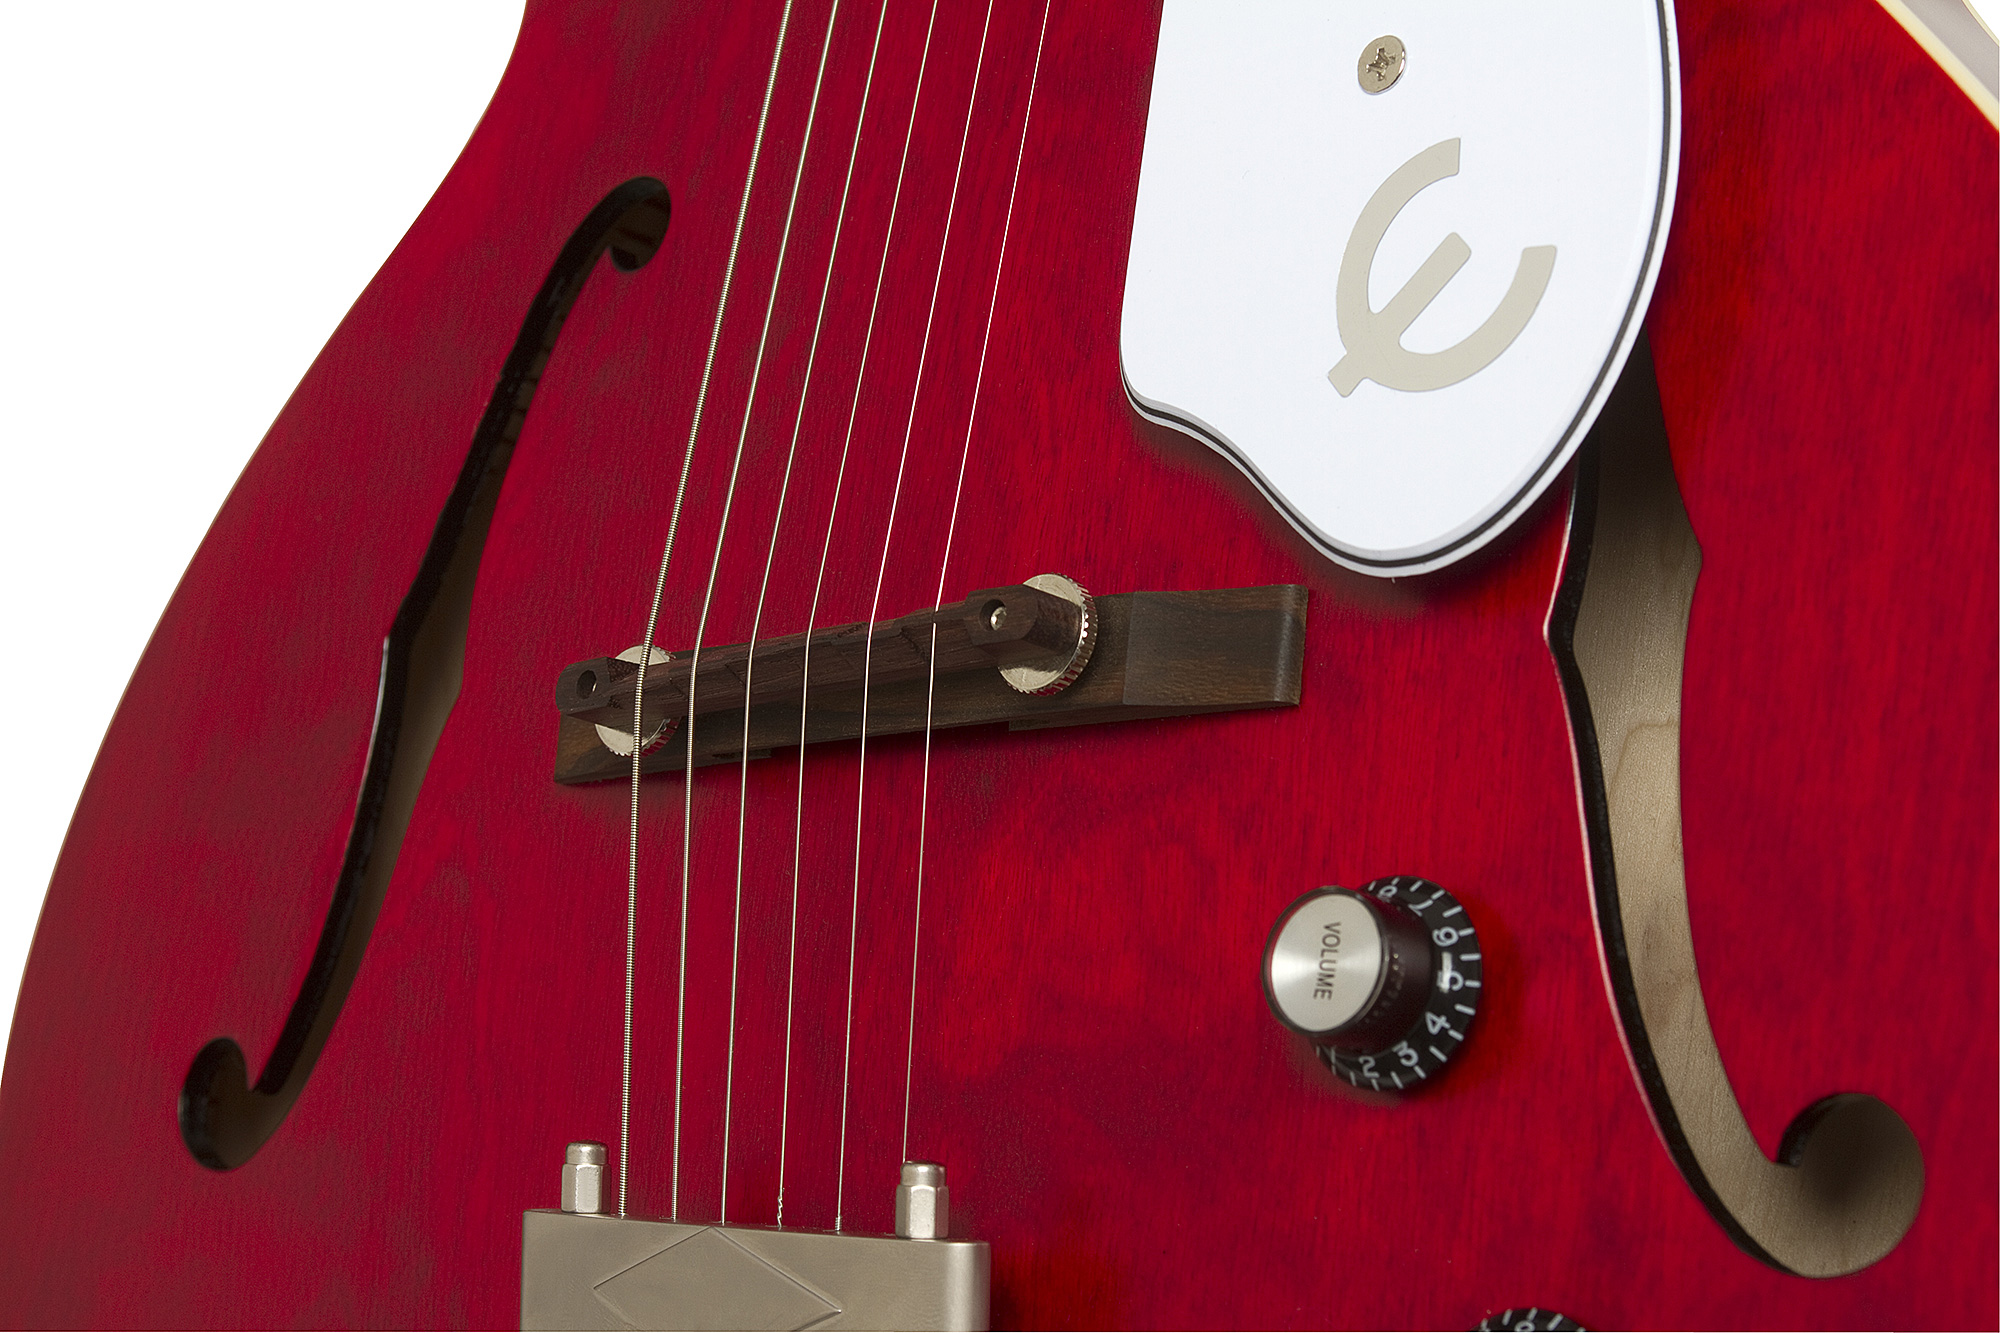 Epiphone Inspired By 1966 Century 2016 - Aged Gloss Cherry - Guitare Électrique 1/2 Caisse - Variation 3